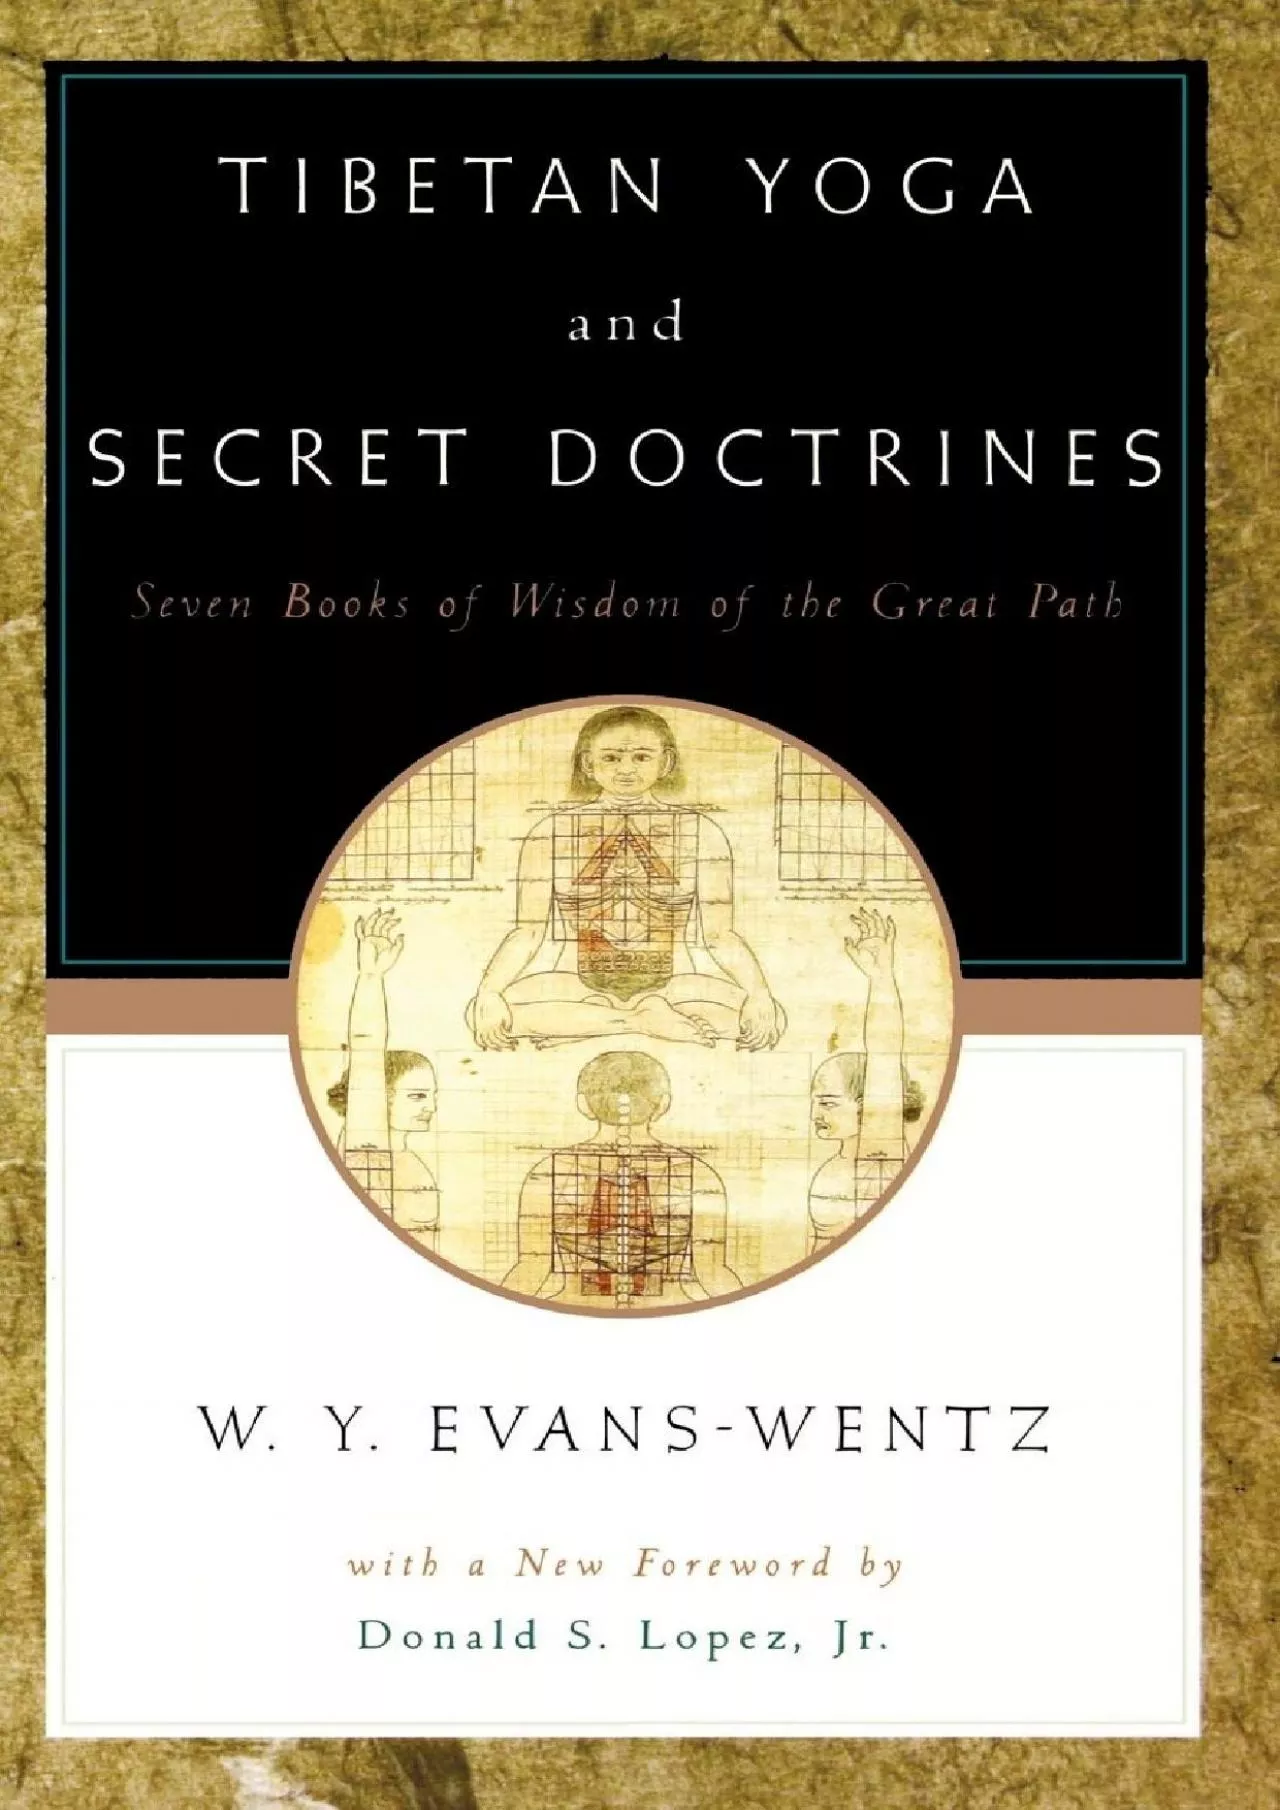 (DOWNLOAD)-Tibetan Yoga and Secret Doctrines: Seven Books of Wisdom of the Great Path,